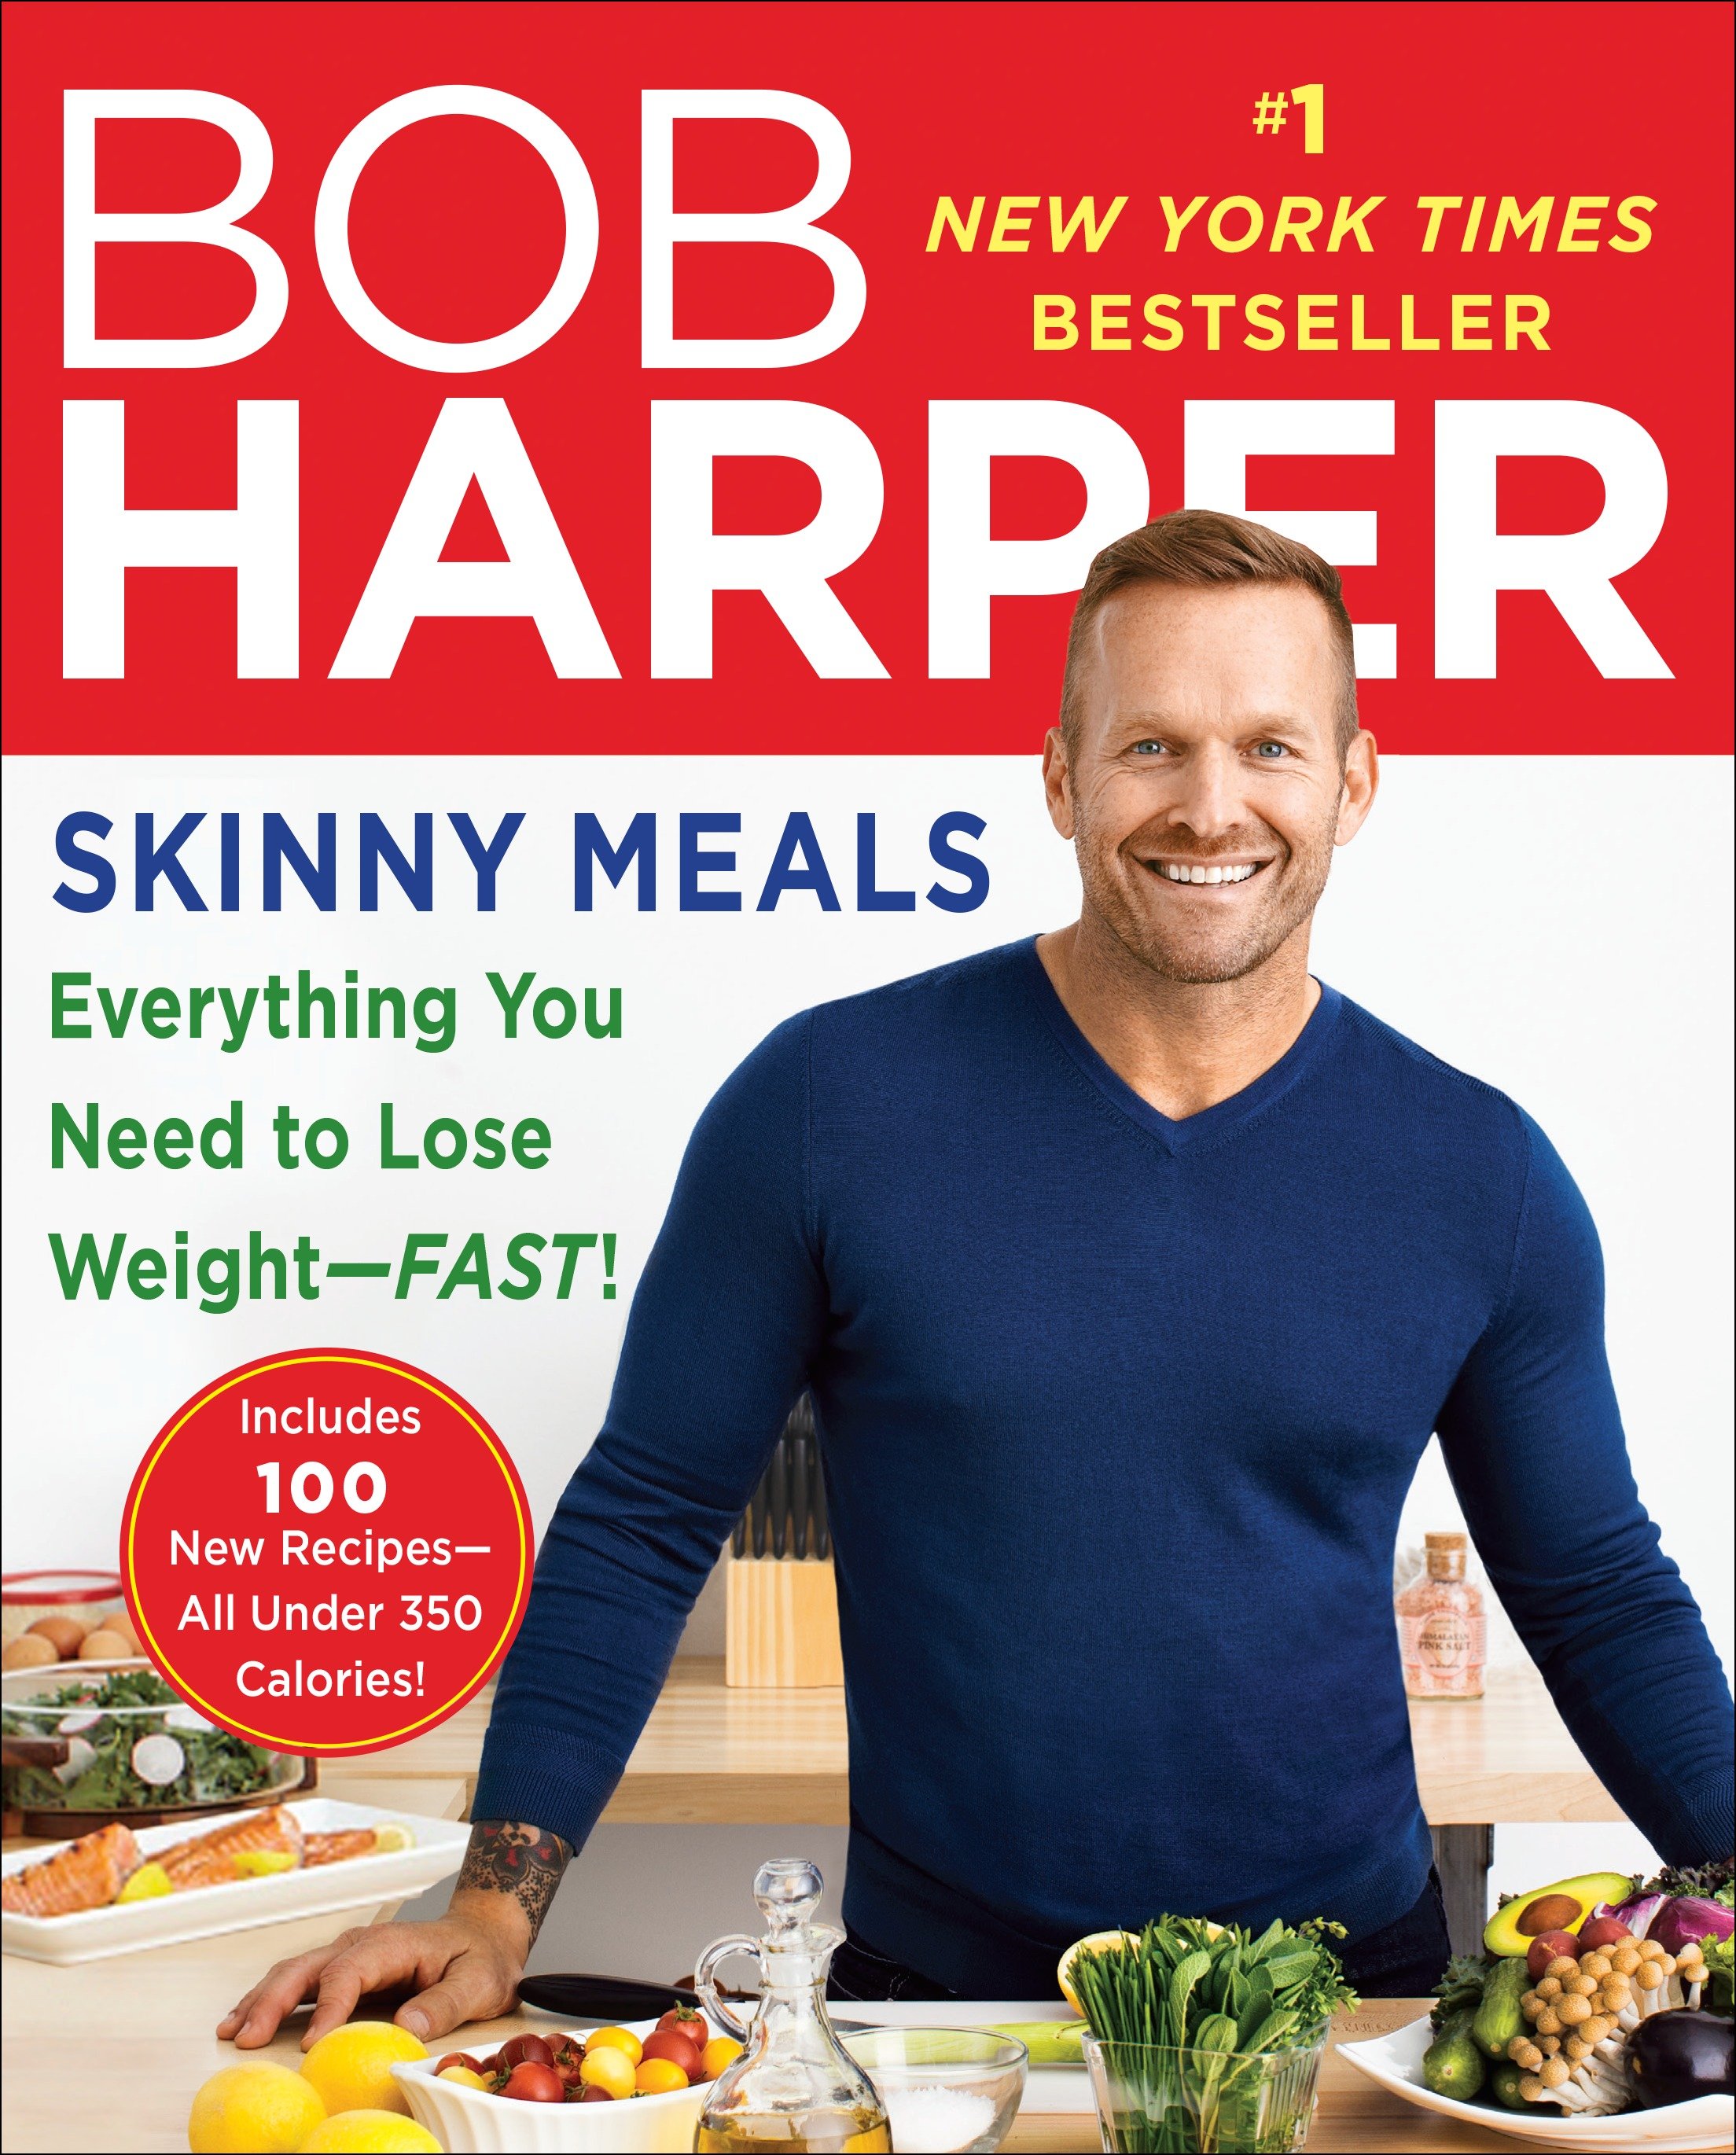 Skinny meals everything you need to lose weight-fast! cover image